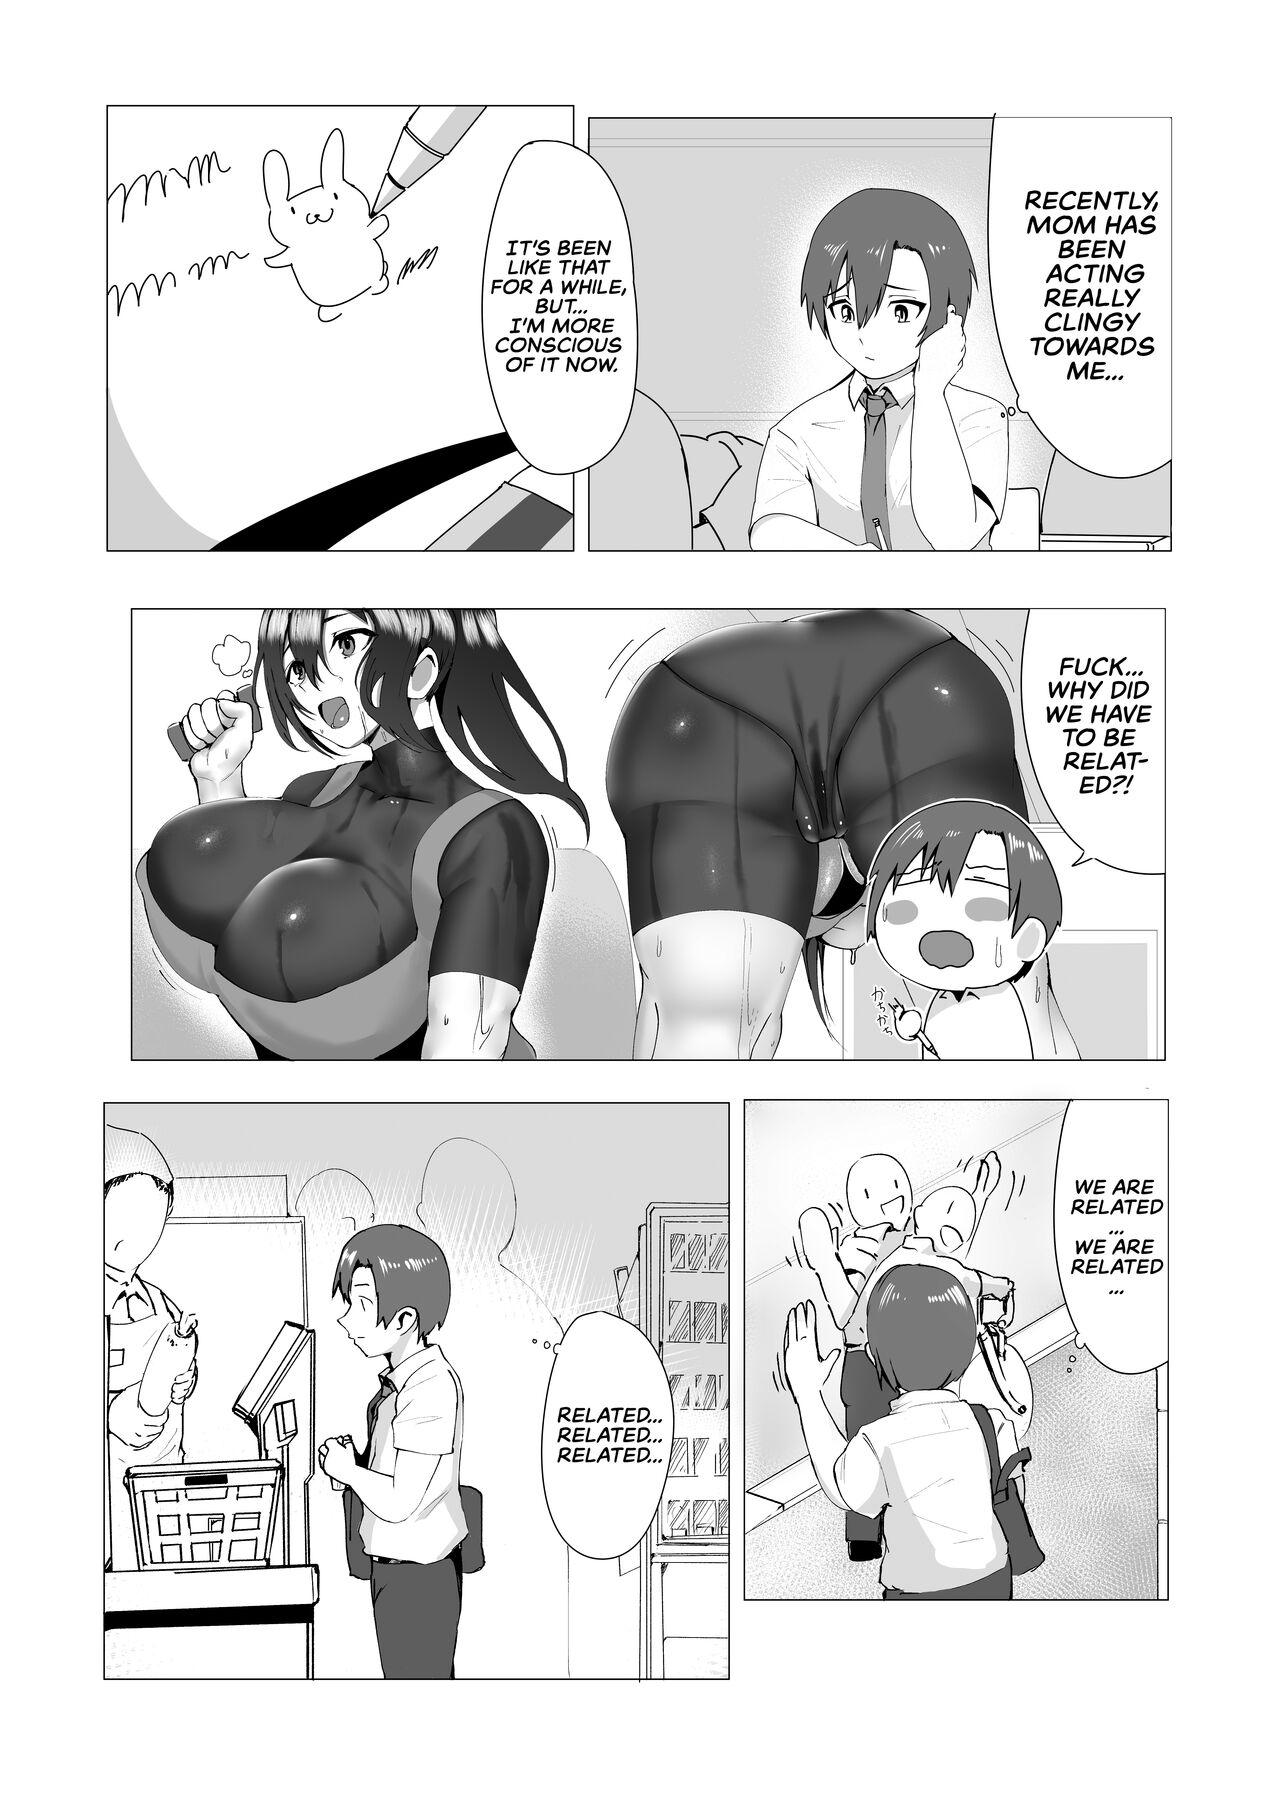 Argentina Hontou ni Mama de Yoi no | Are You Okay With Mommy? - Original Office Fuck - Page 6